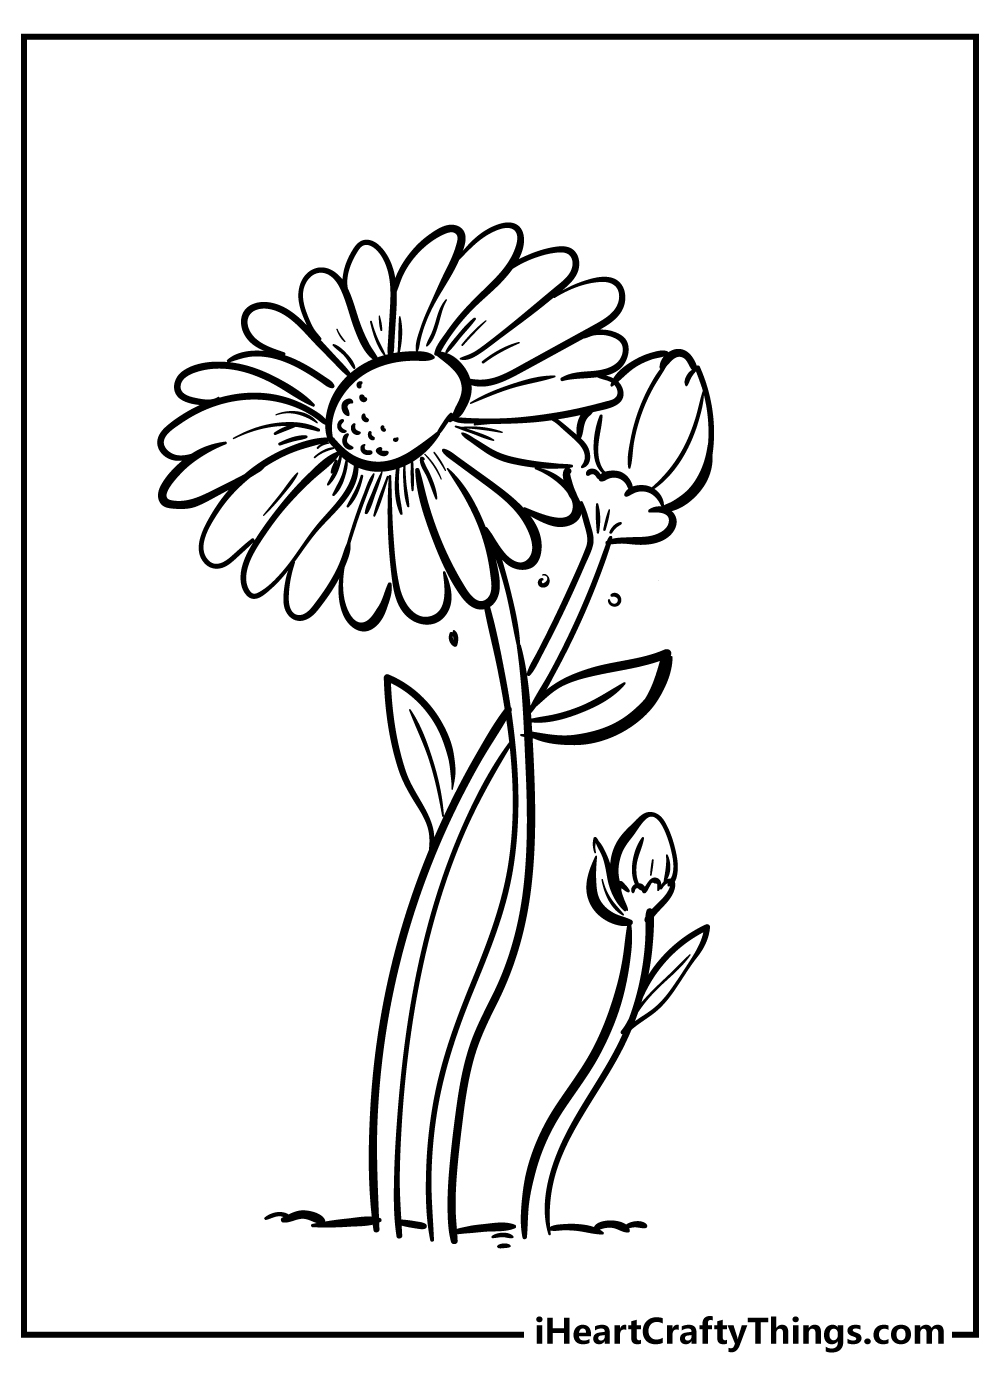 Printable Daisy Coloring Pages Updated 20